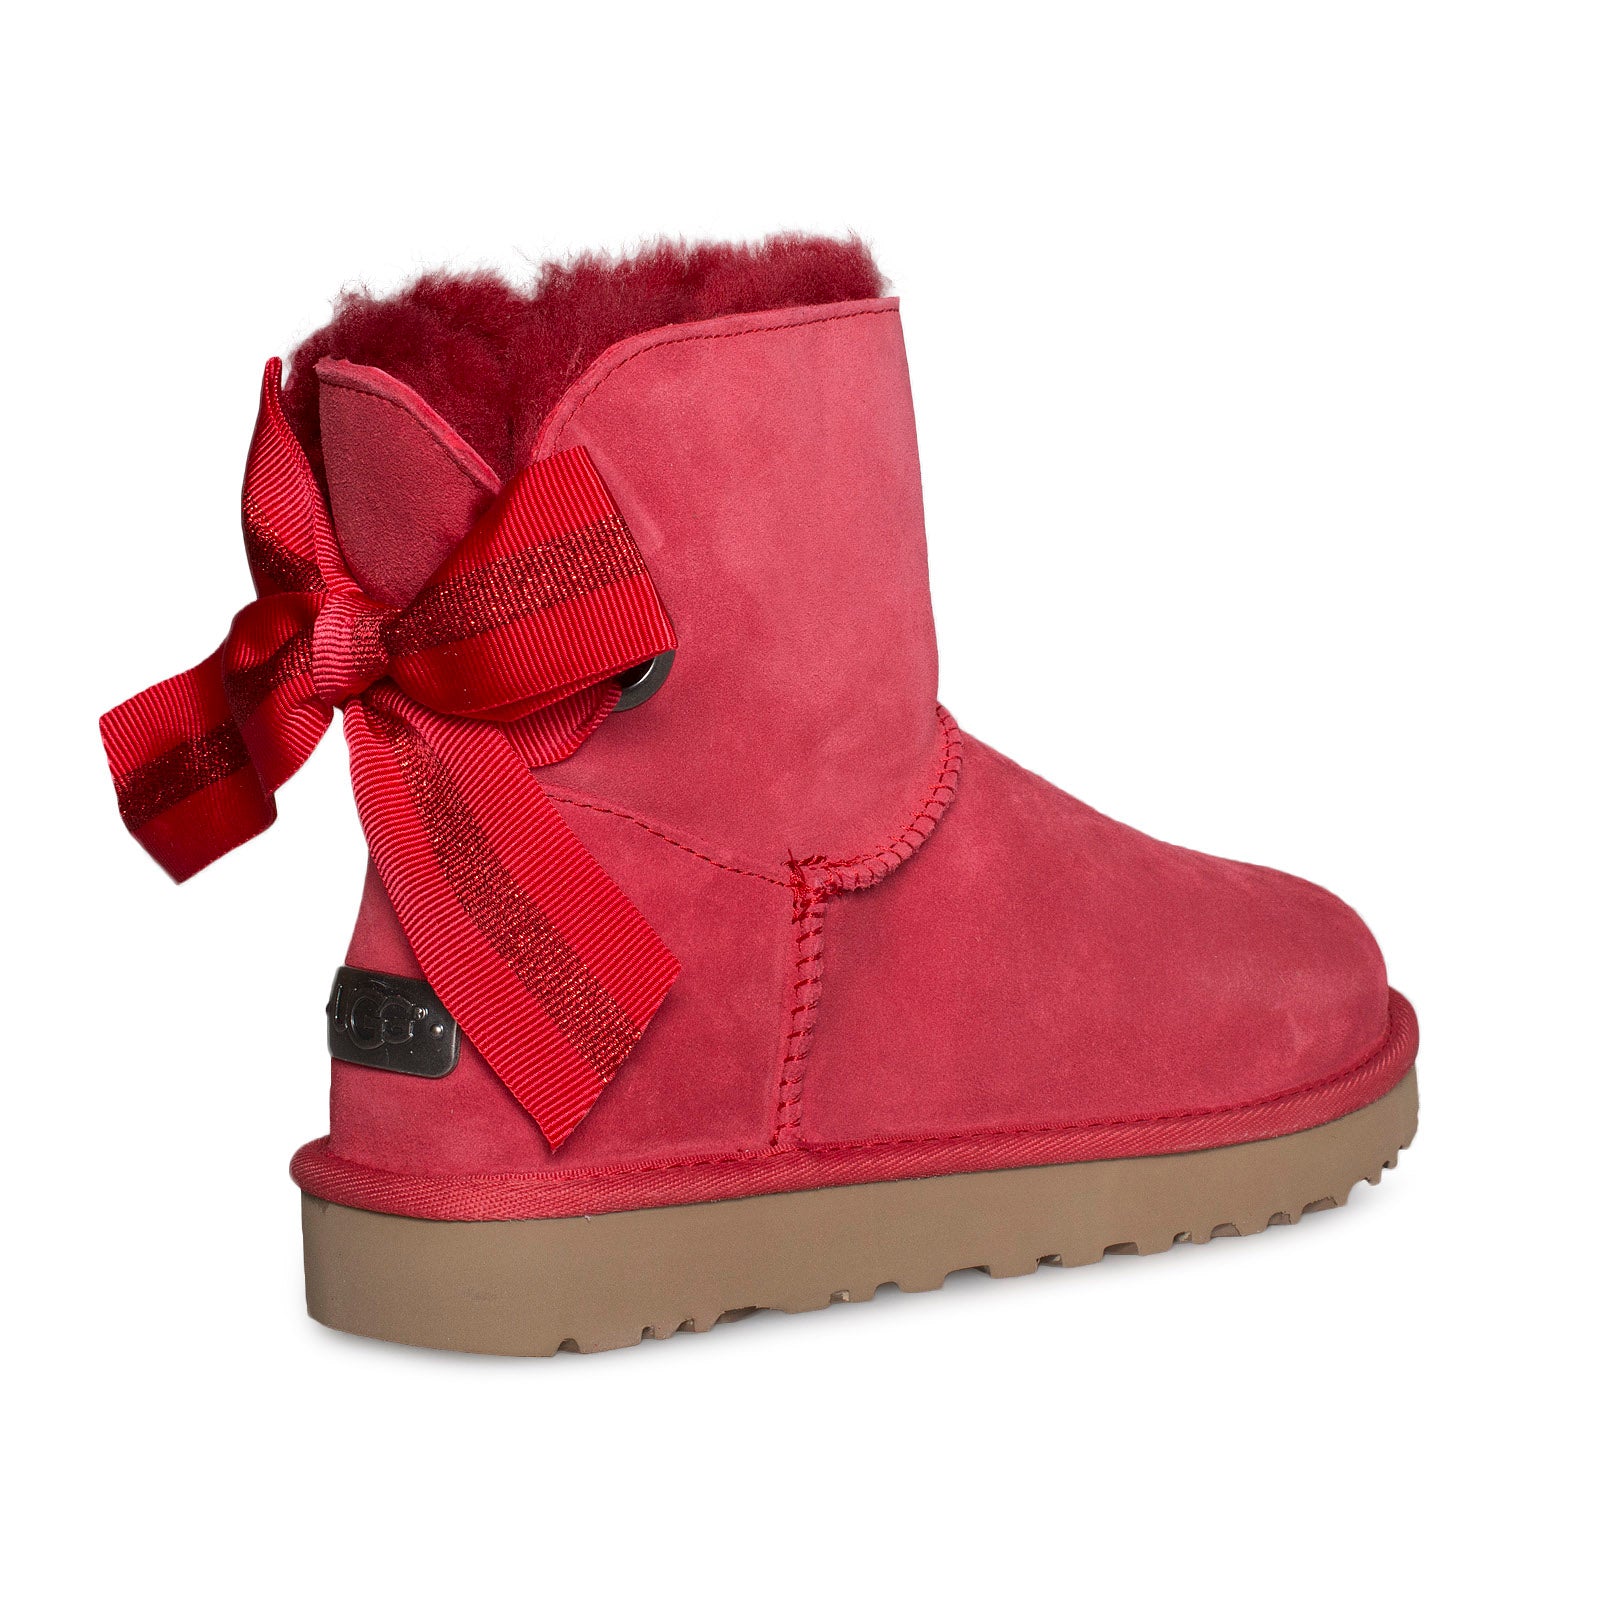 red uggs with bows Cheaper Than Retail 